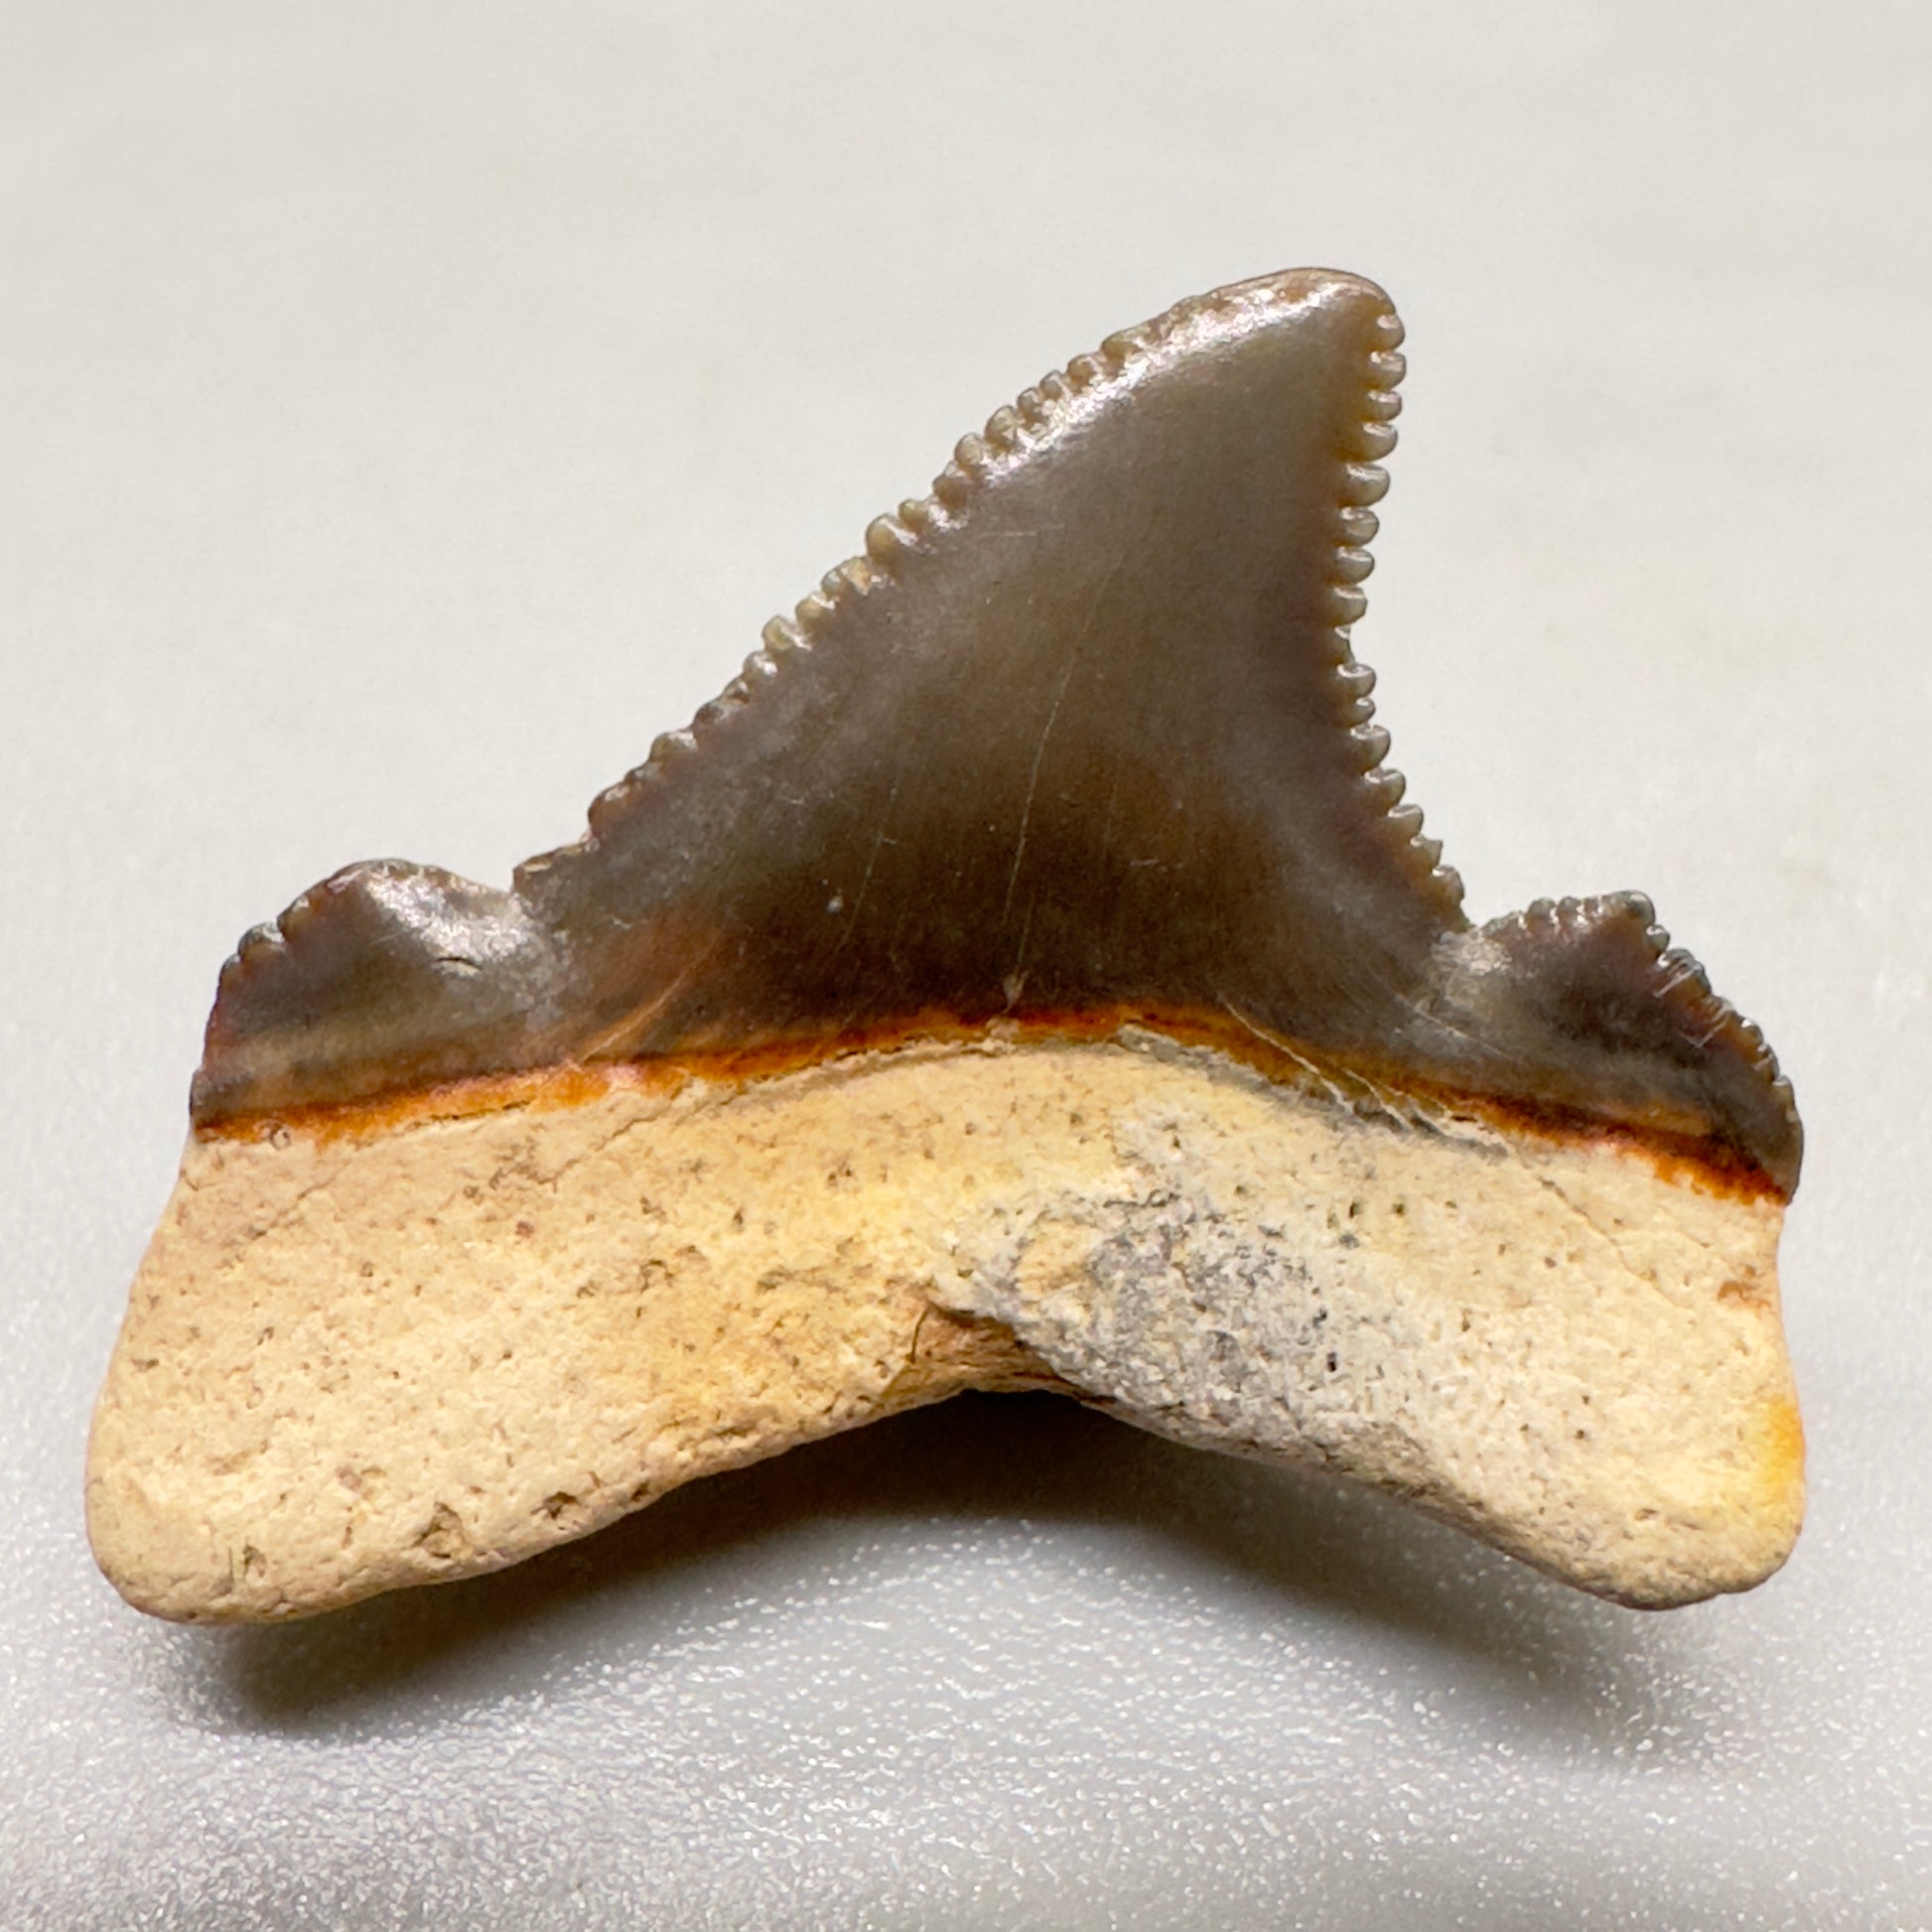  Tiny, colorful 0.95 inches Carcharocles angustidens shark tooth from Summerville, South Carolina AN408 back